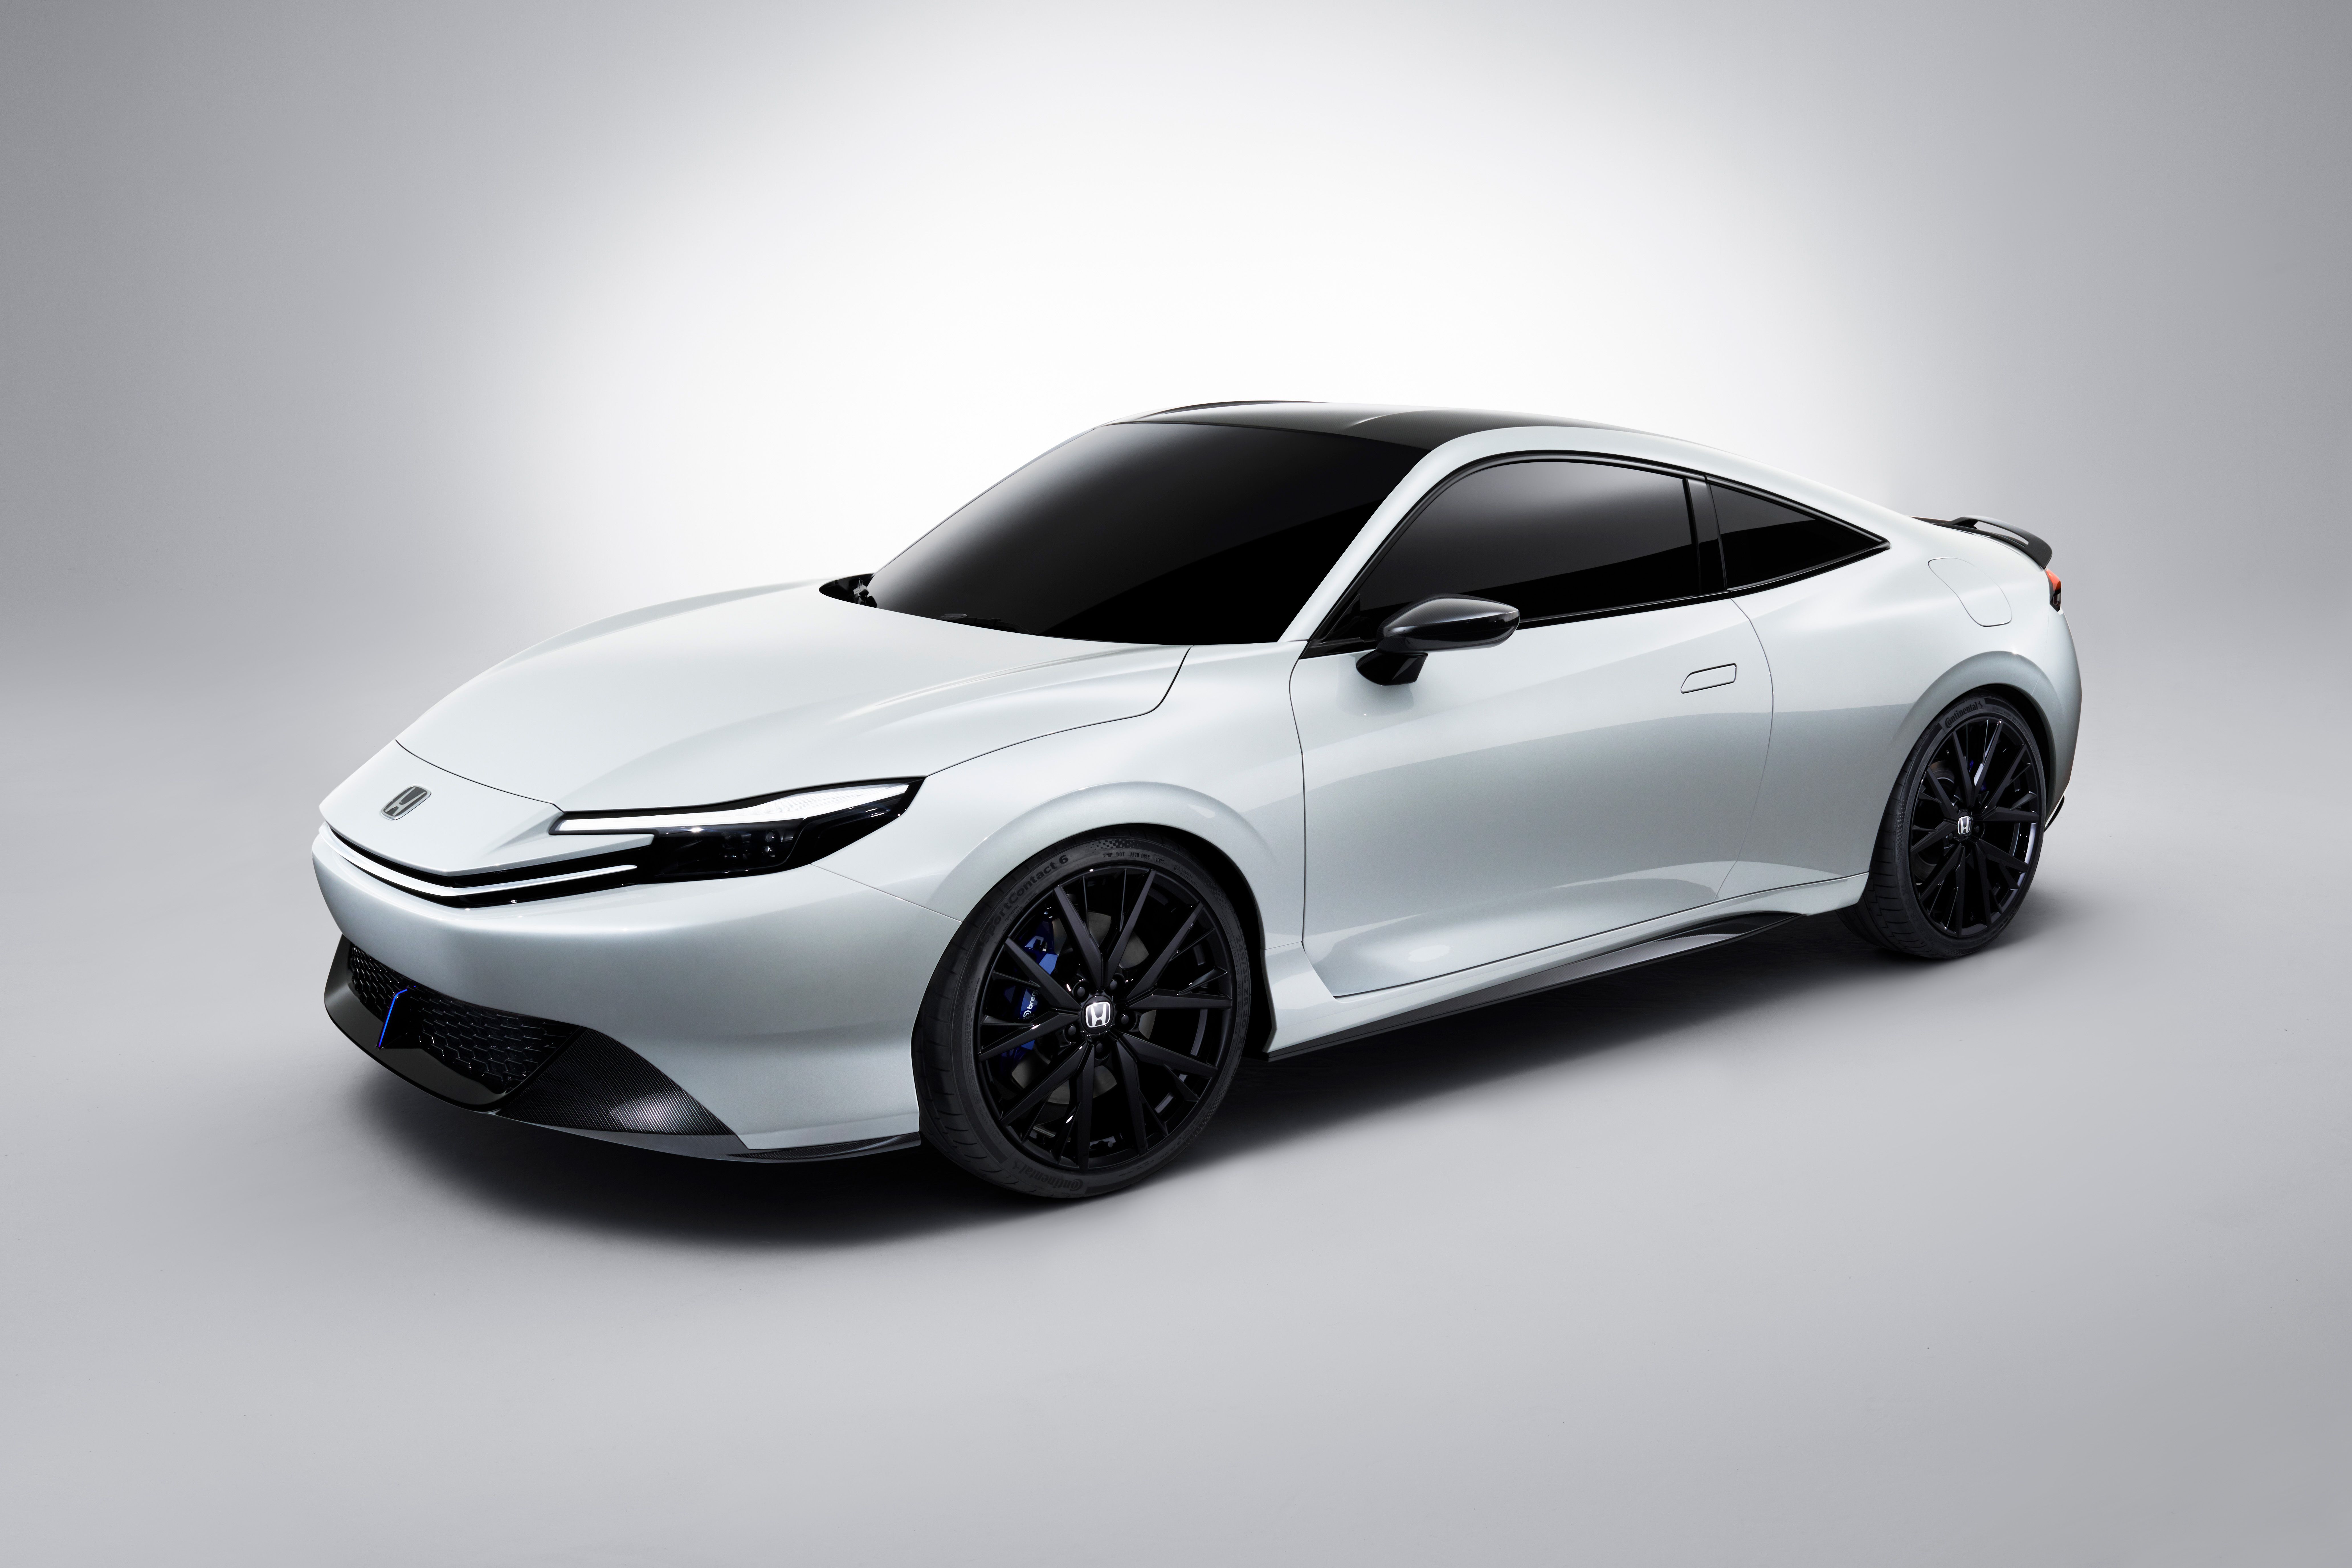 Honda Prelude Returns as a Sporty Coupe, Now with Hybrid Power